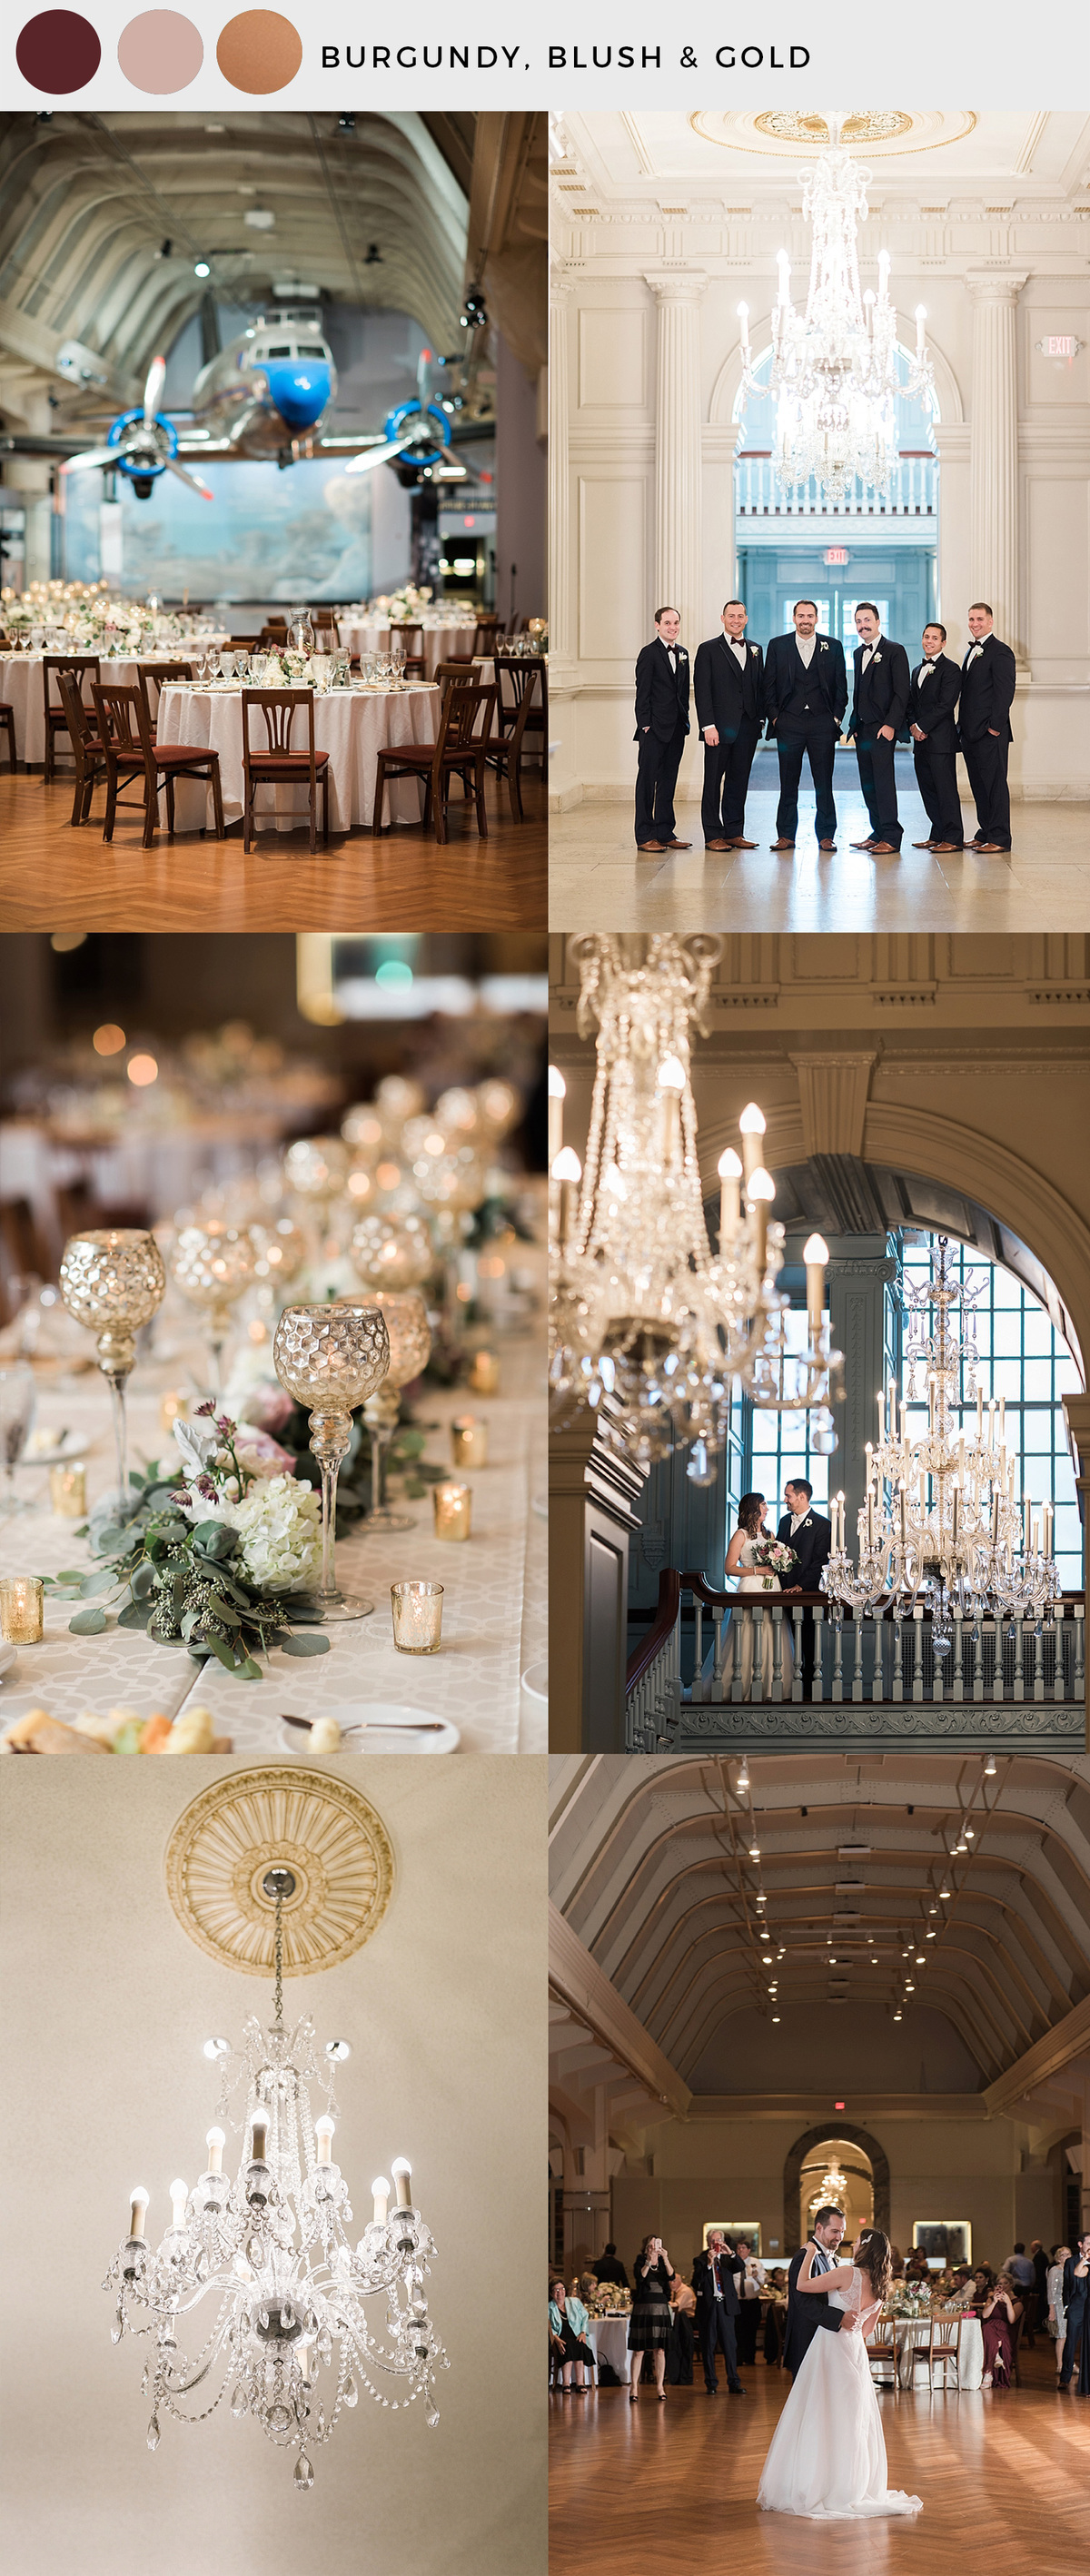 The Henry Ford Museum Wedding photos showing Michigan winter wedding venues